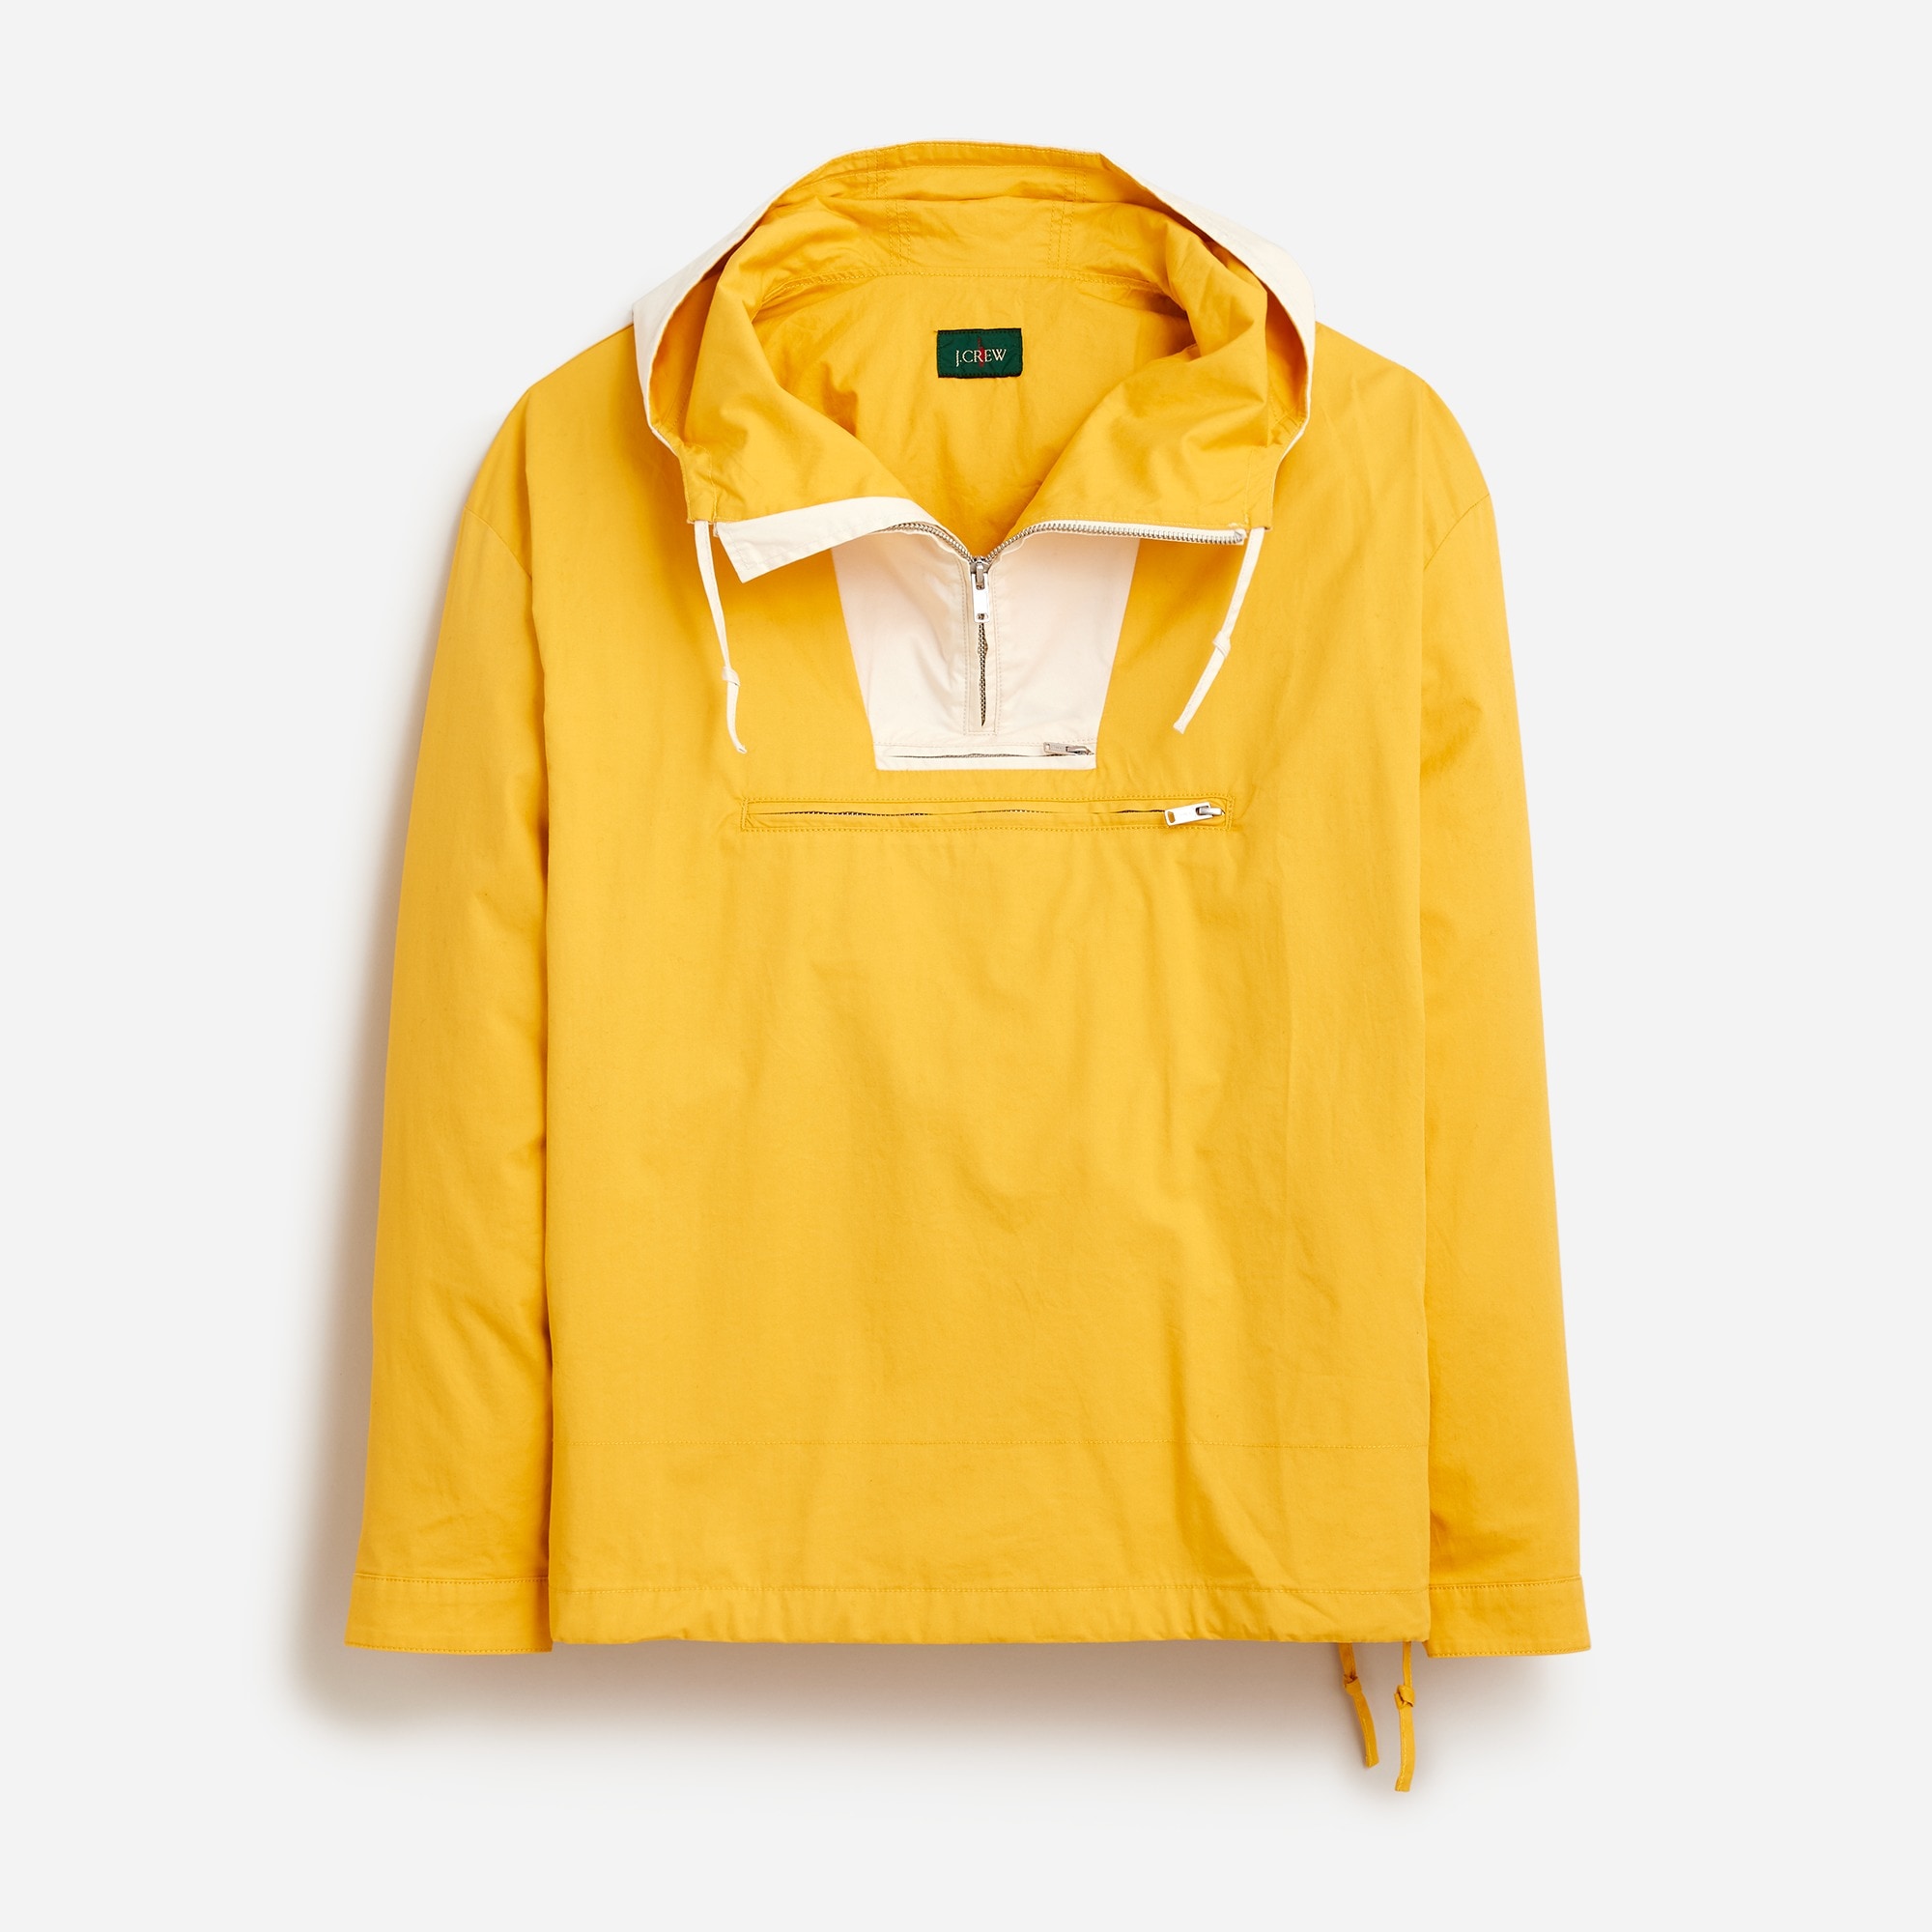  Limited-edition 1989 heritage anorak in cotton